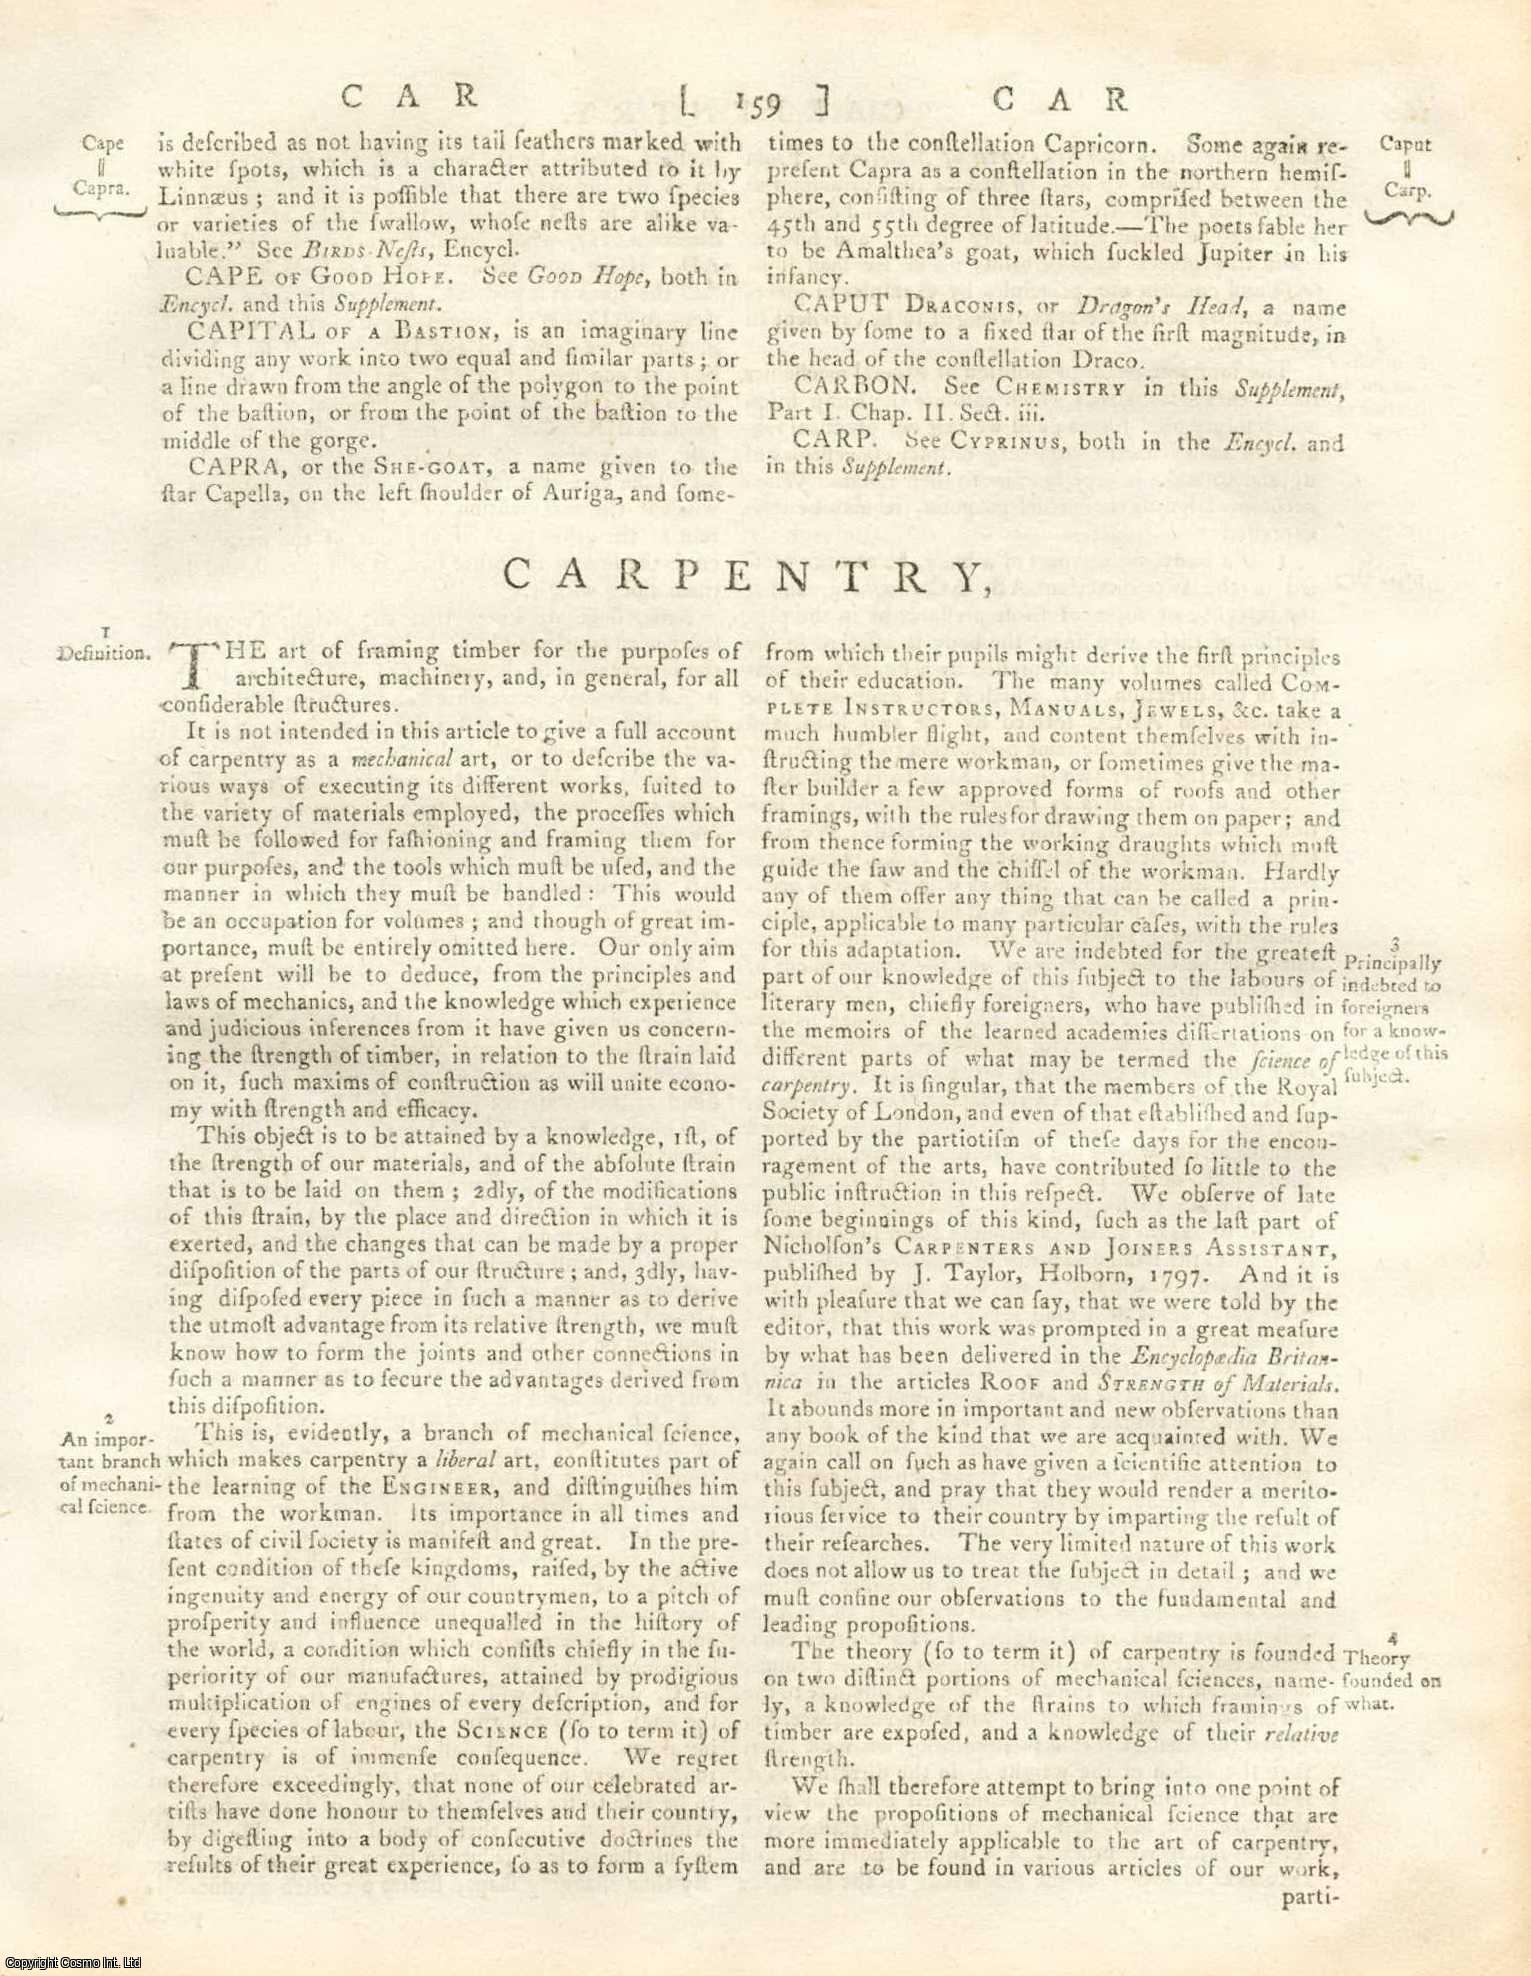 John Robison FRSE (1739-1805), British physicist & mathematician. Professor of natural philosophy. - Carpentry. The art of framing timber for the purposes of architecture, and machinery. A rare original article from the Encyclopaedia Britannica, 1797.